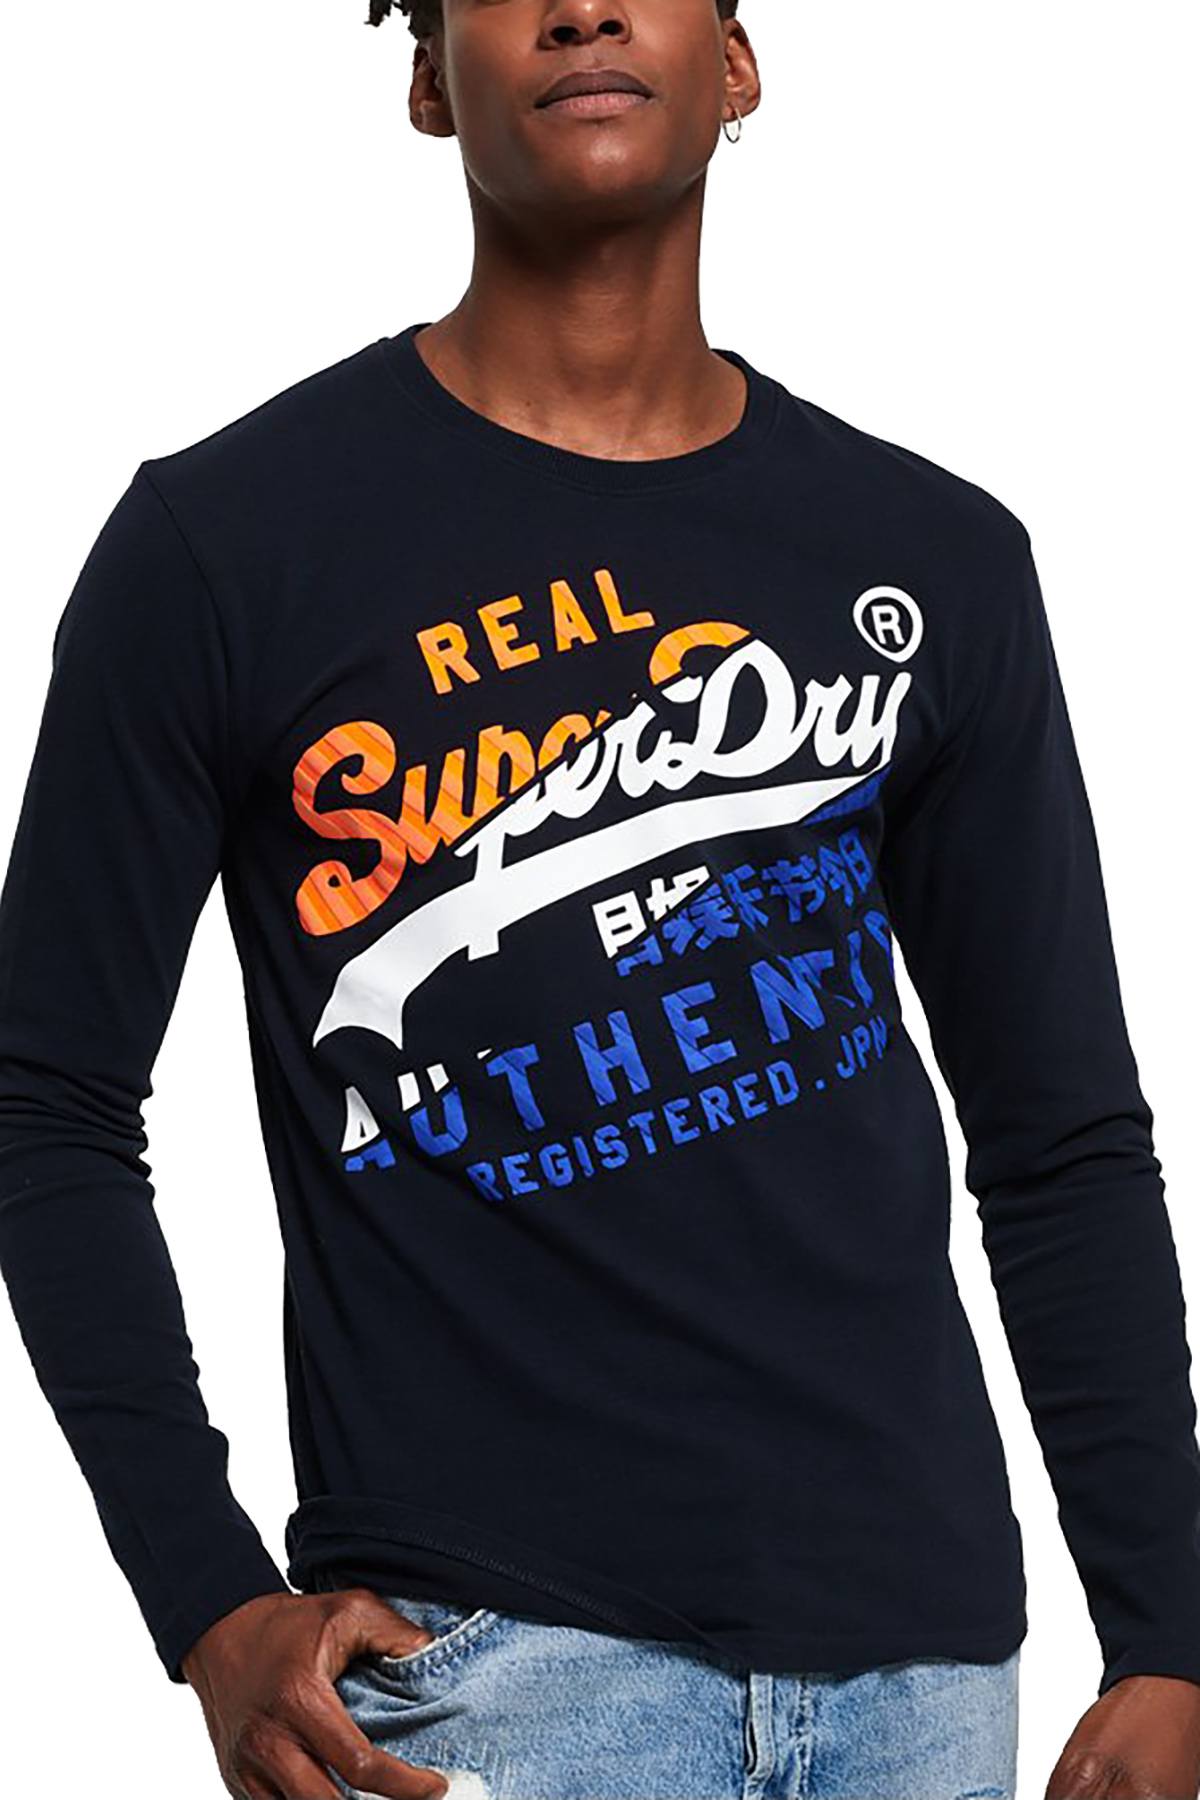 SuperDry Eclipse-Navy Vintage Authentic XL Long-Sleeve T-Shirt – CheapUndies